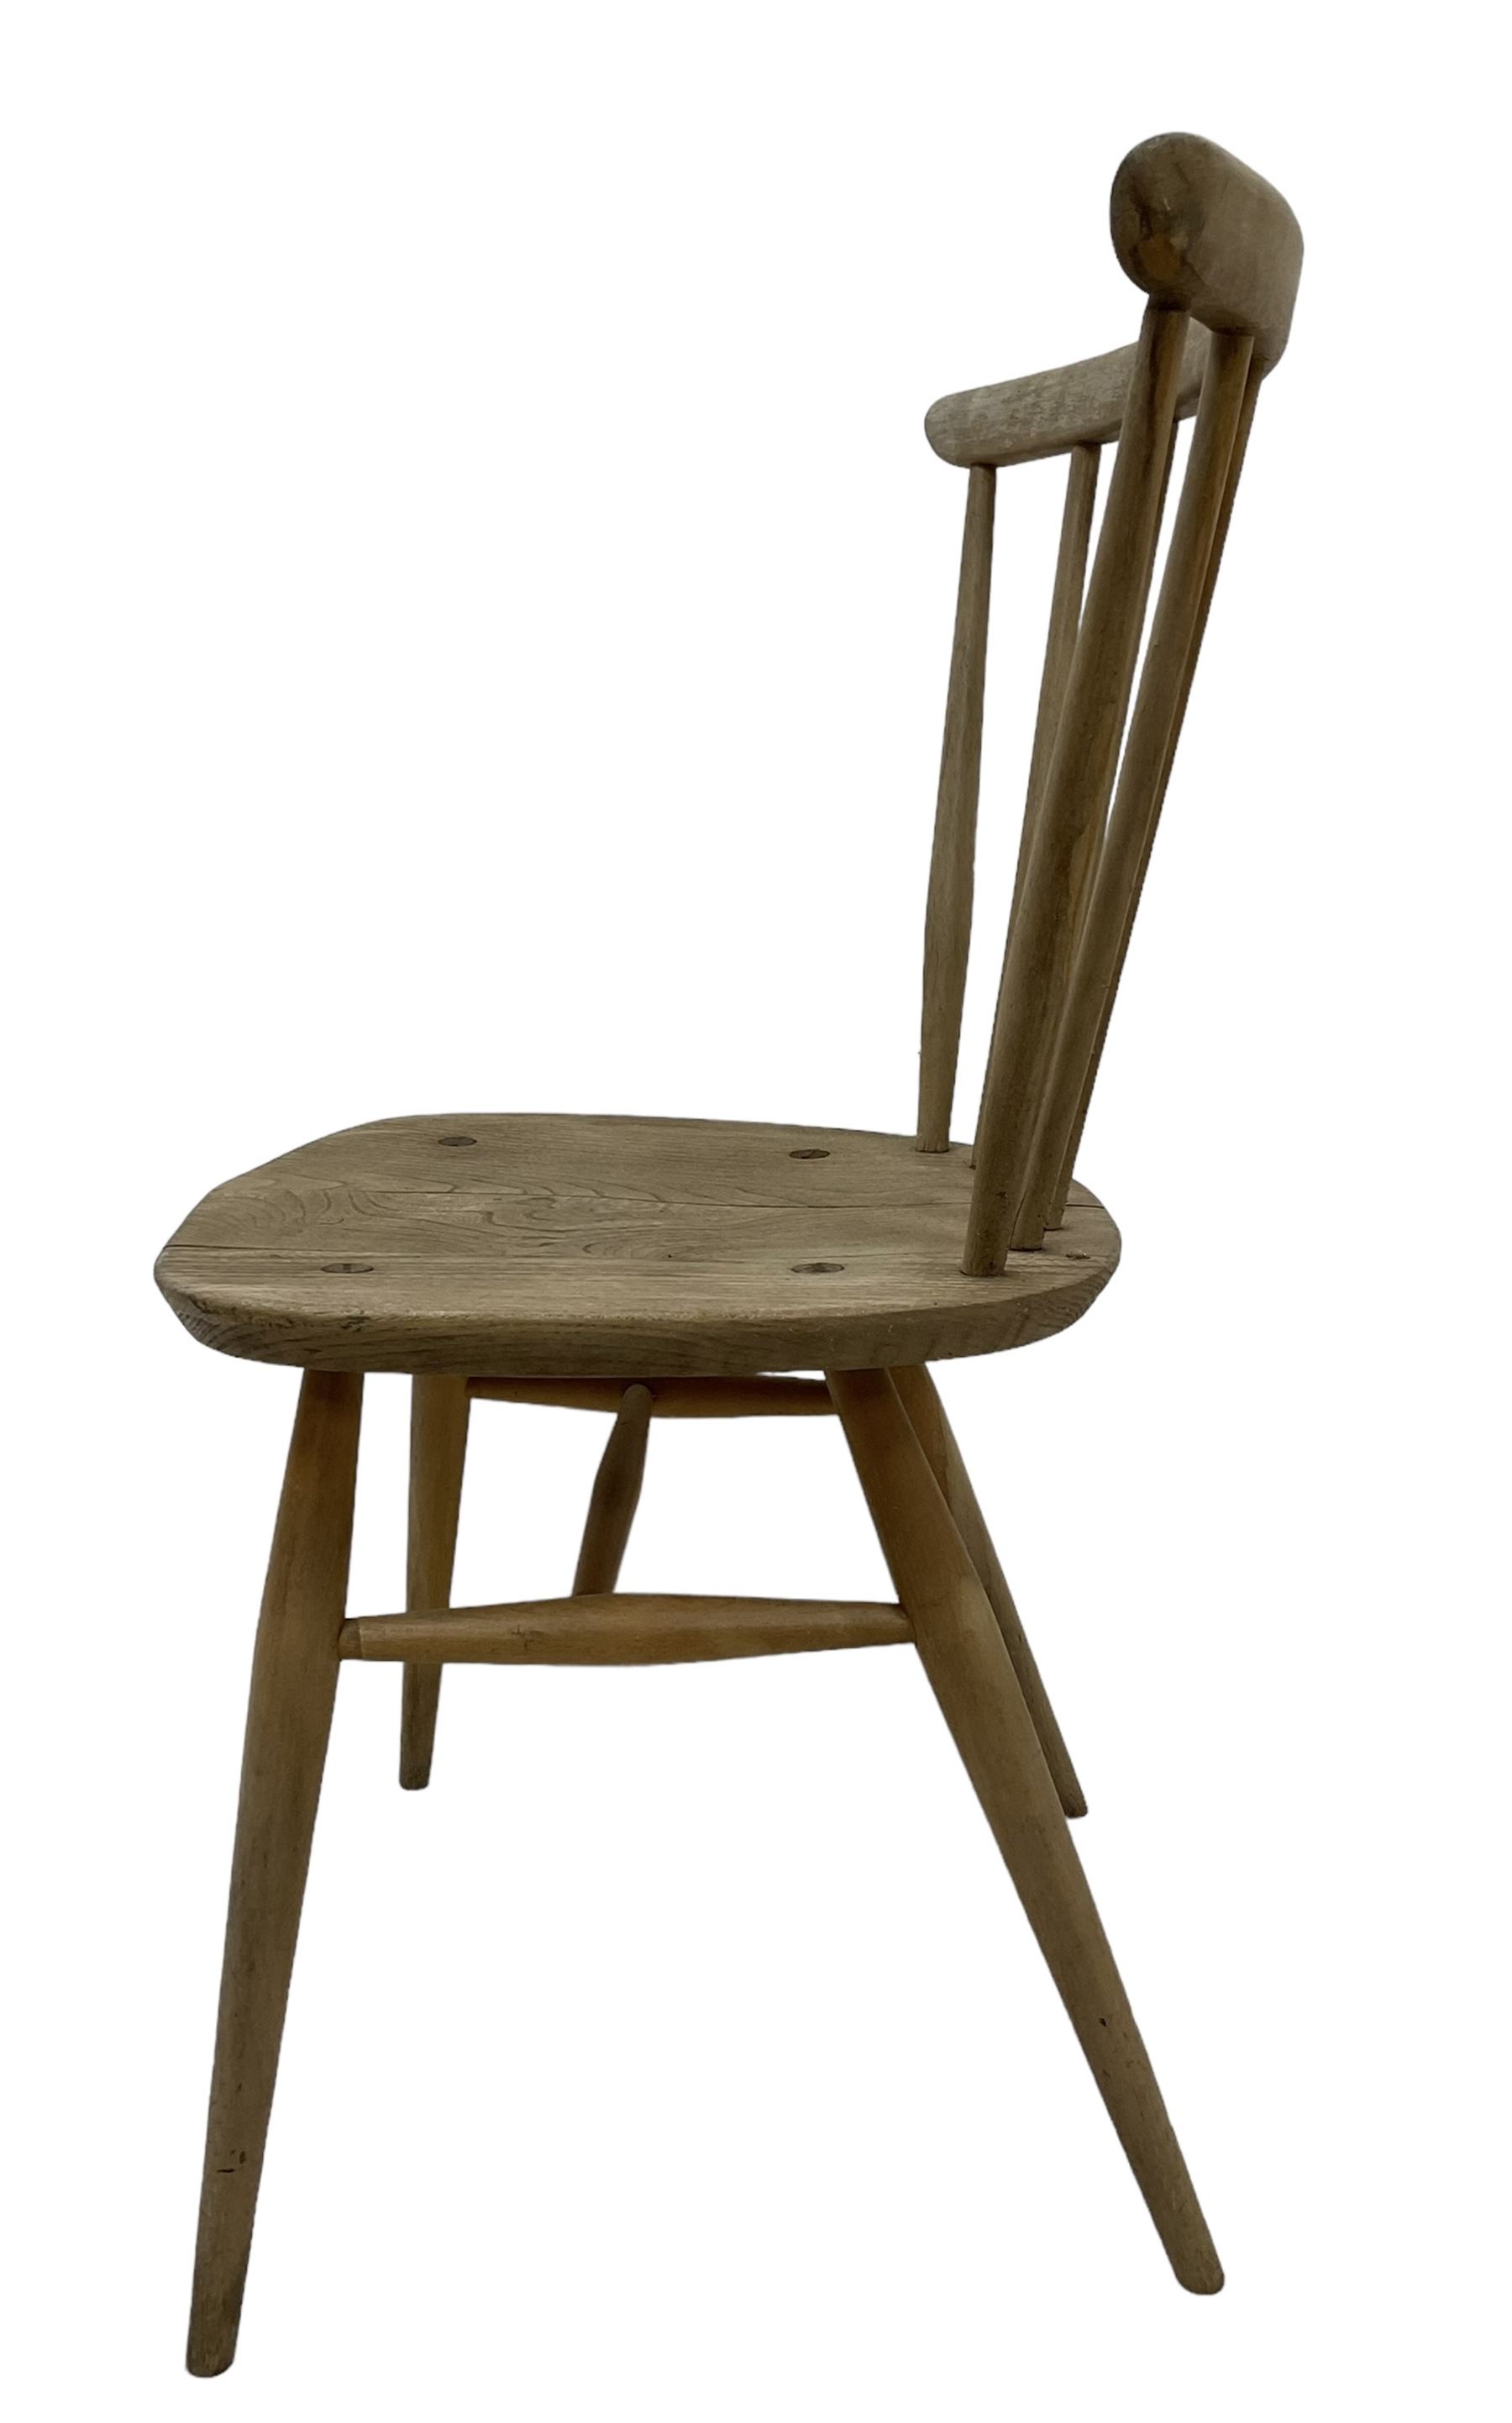 Ercol - 1960s set of three elm stick back chairs - Image 9 of 9